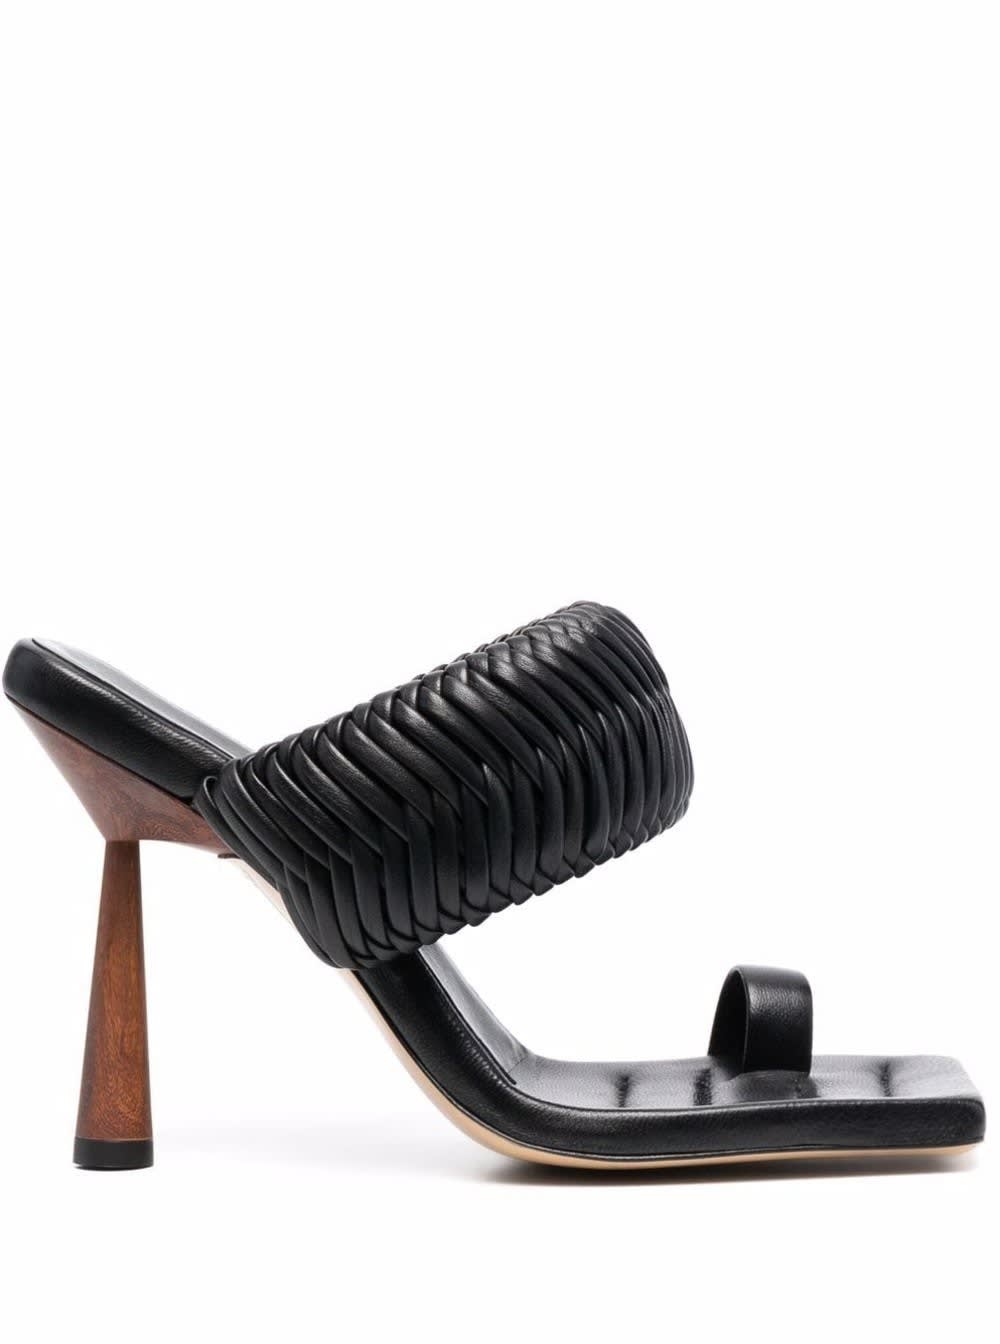 GIA COUTURE Rosie Leather Sandals